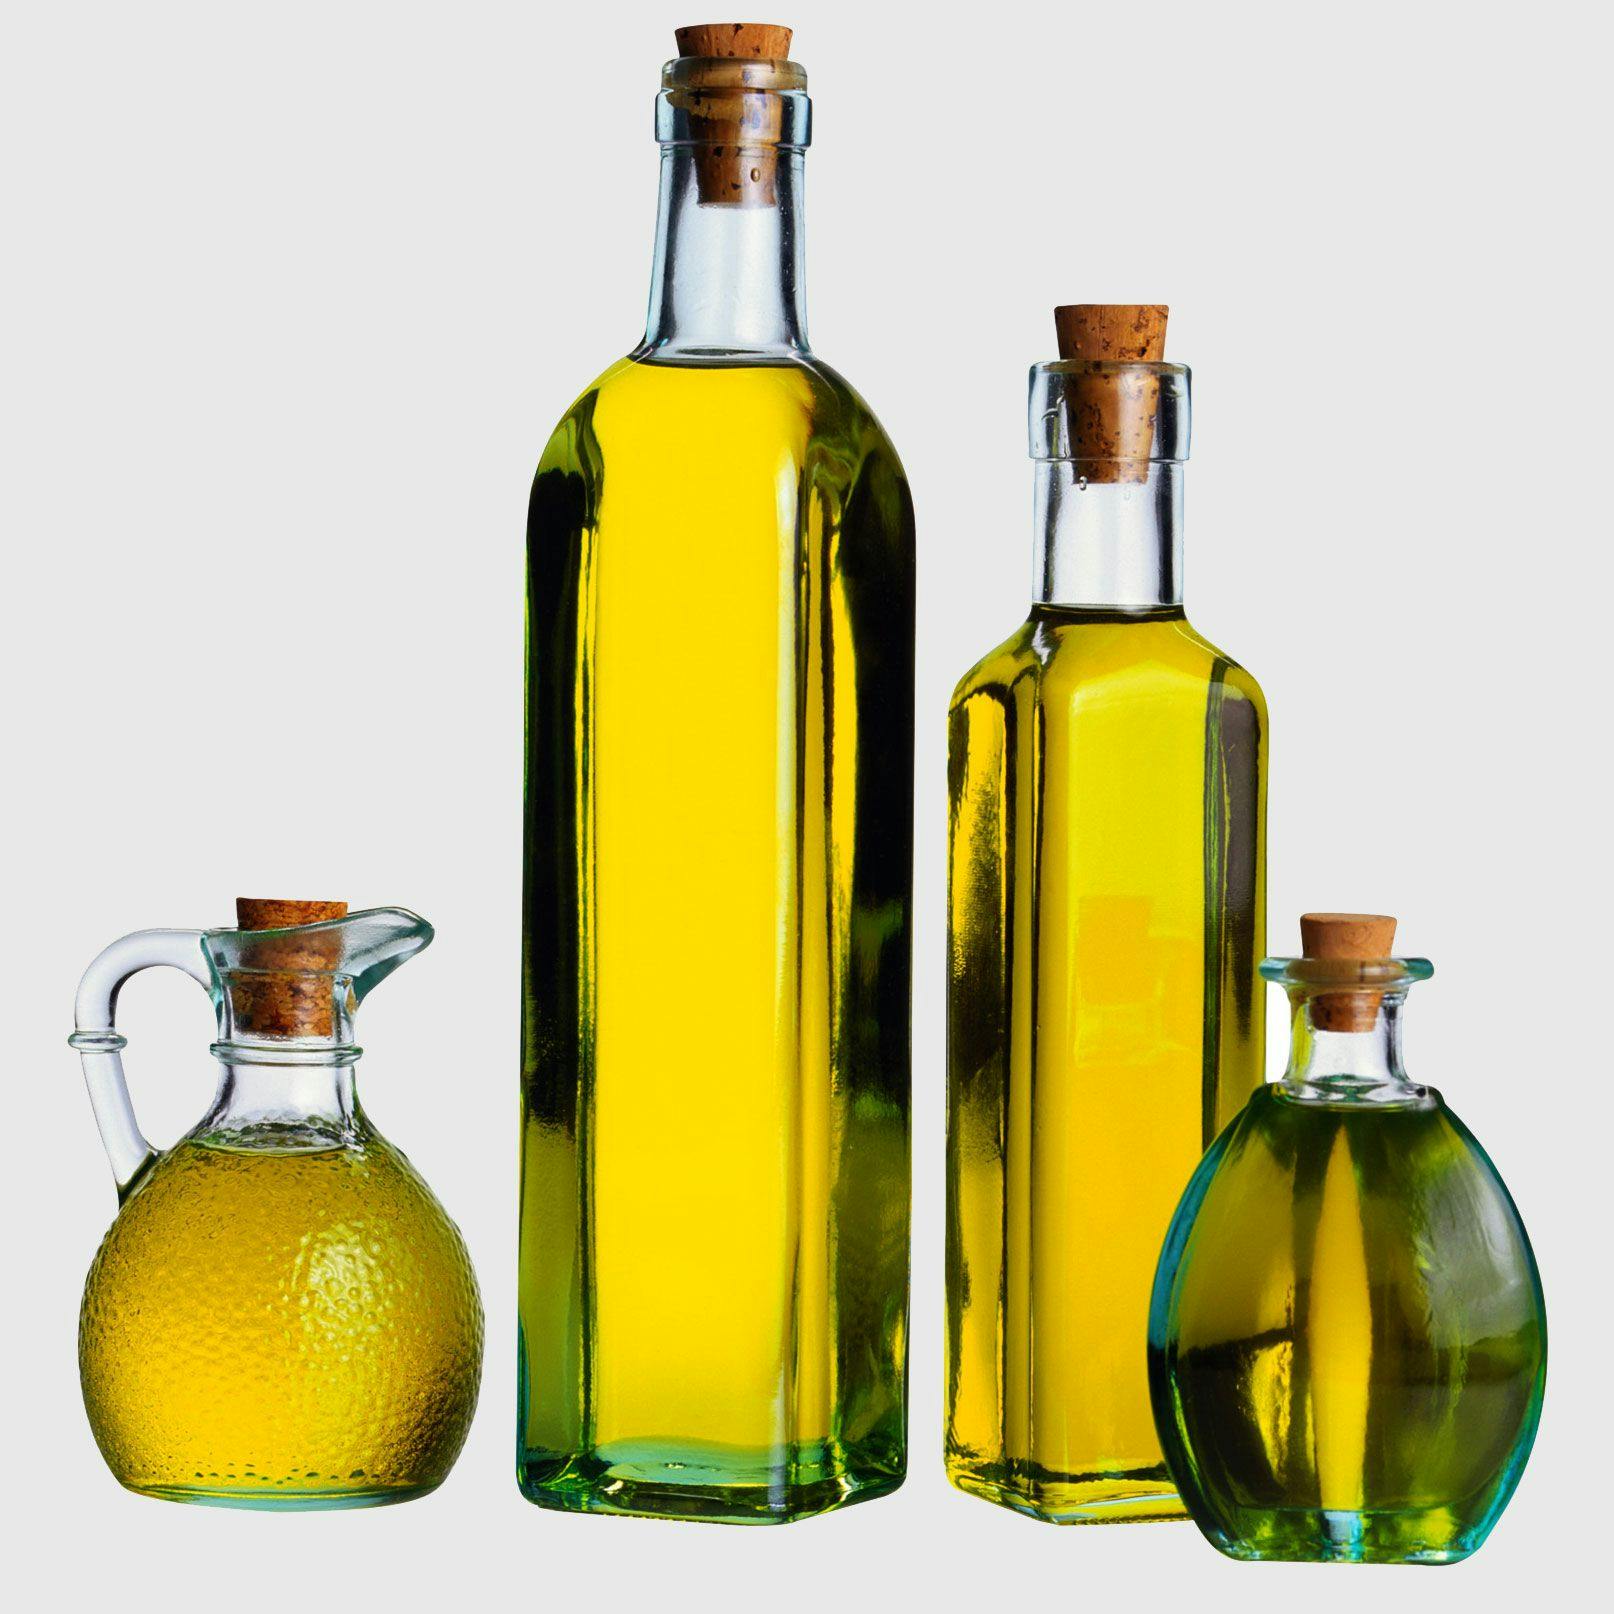 Extra Virgin Olive Oil May Help Lower Risk of Breast Cancer in Older Women